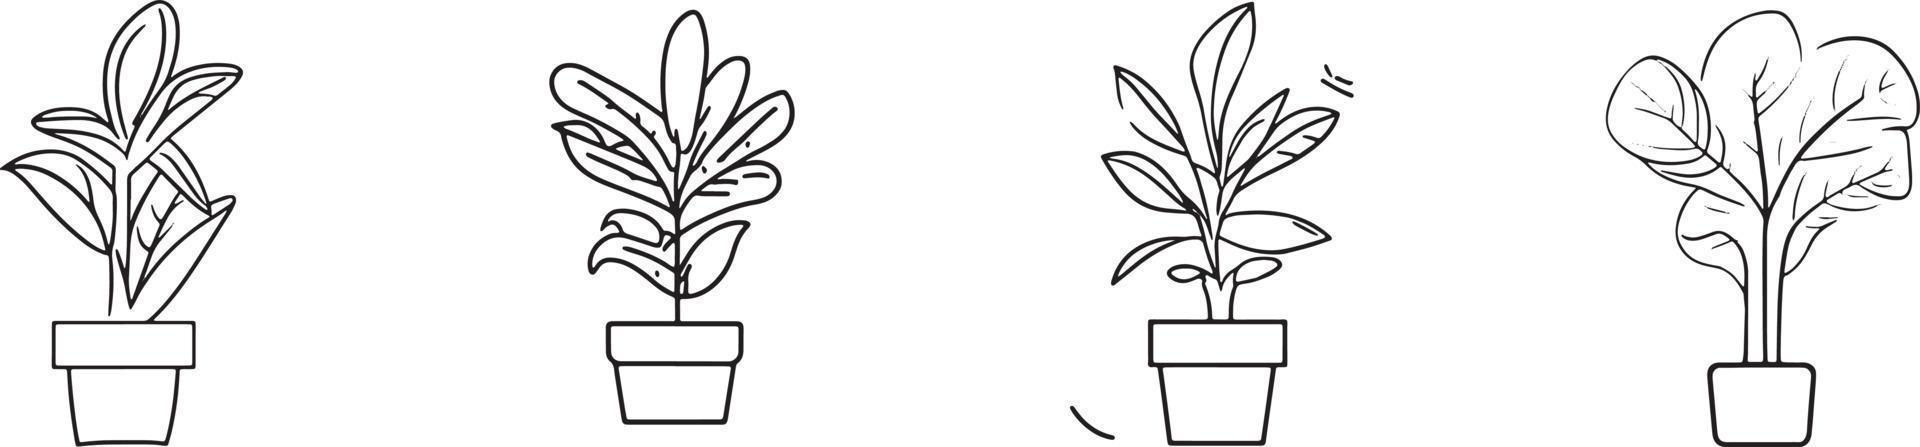 Minimalist Collection of Hand-Drawn Homeplant Pots in Flat Design vector